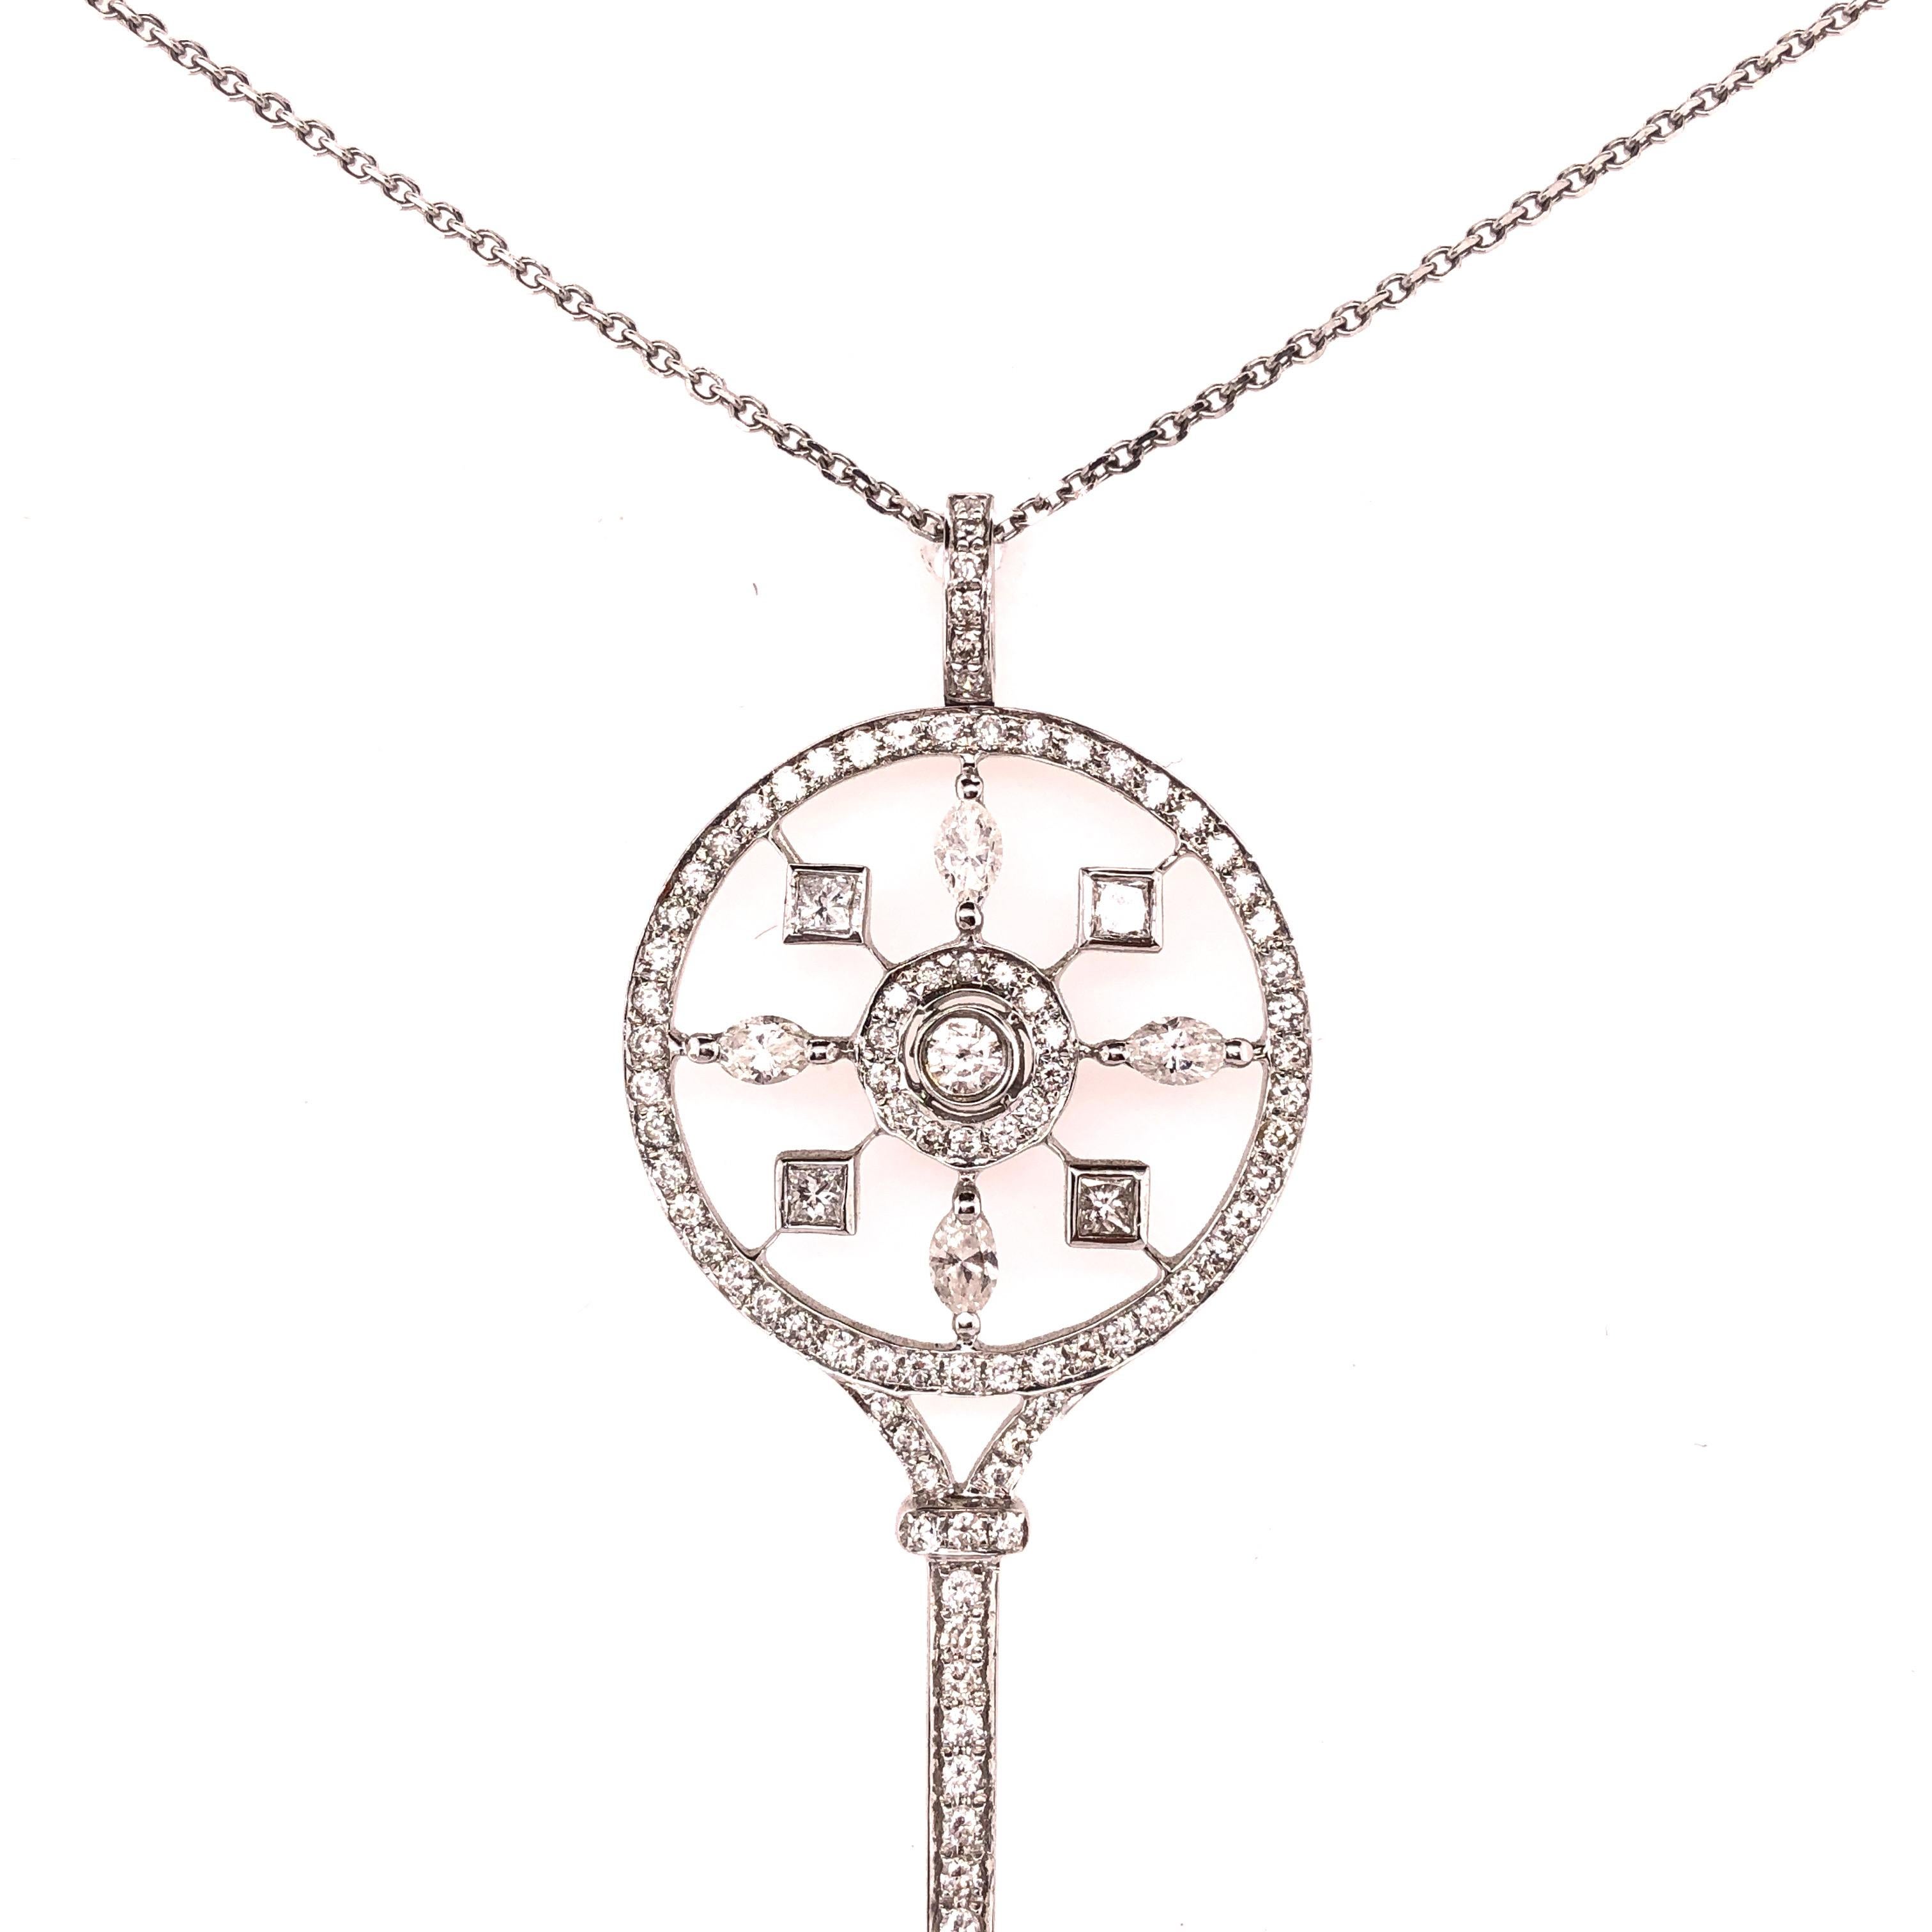 18Kt White Gold & Diamond Key Pendant Necklace, in the manner of Tiffany and Company on a 14KT White gold chain. Petals key pendant stamped 750 with round brilliant diamonds. The pendant itself measuring a large and impressive. 65.5 mm high by 21.75